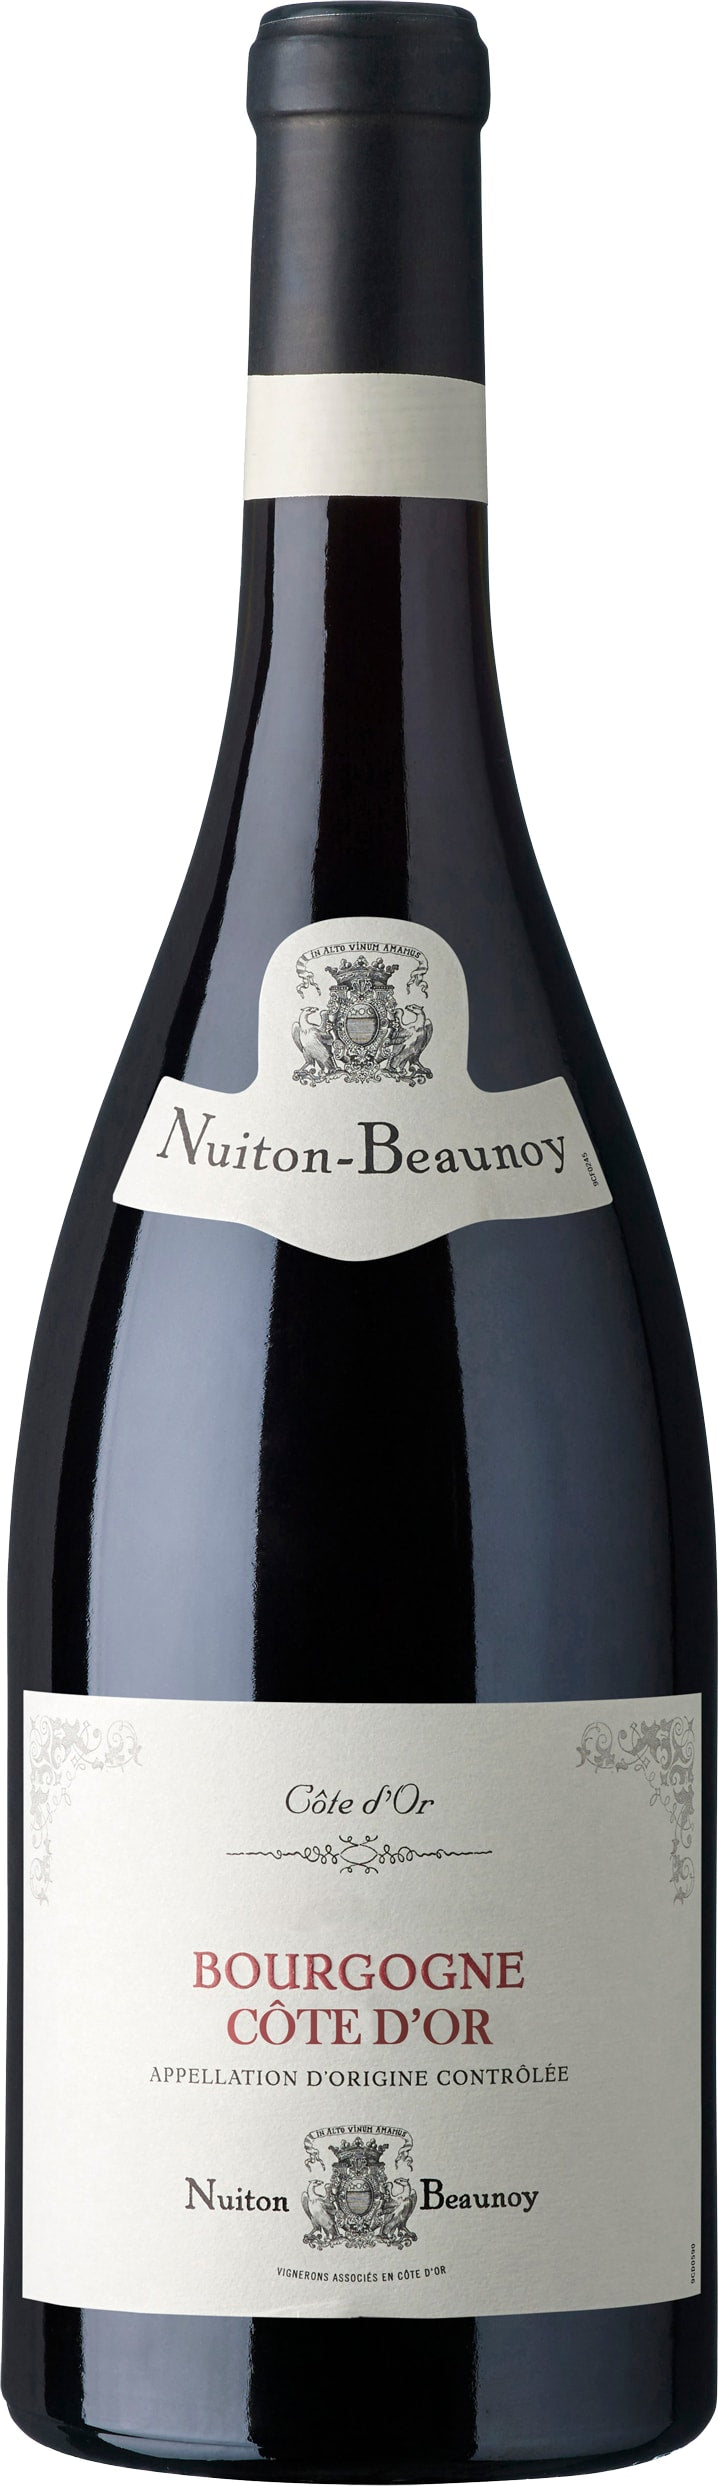 Nuiton-Beaunoy Bourgogne Cote d'Or 2019 75cl - Buy Nuiton-Beaunoy Wines from GREAT WINES DIRECT wine shop